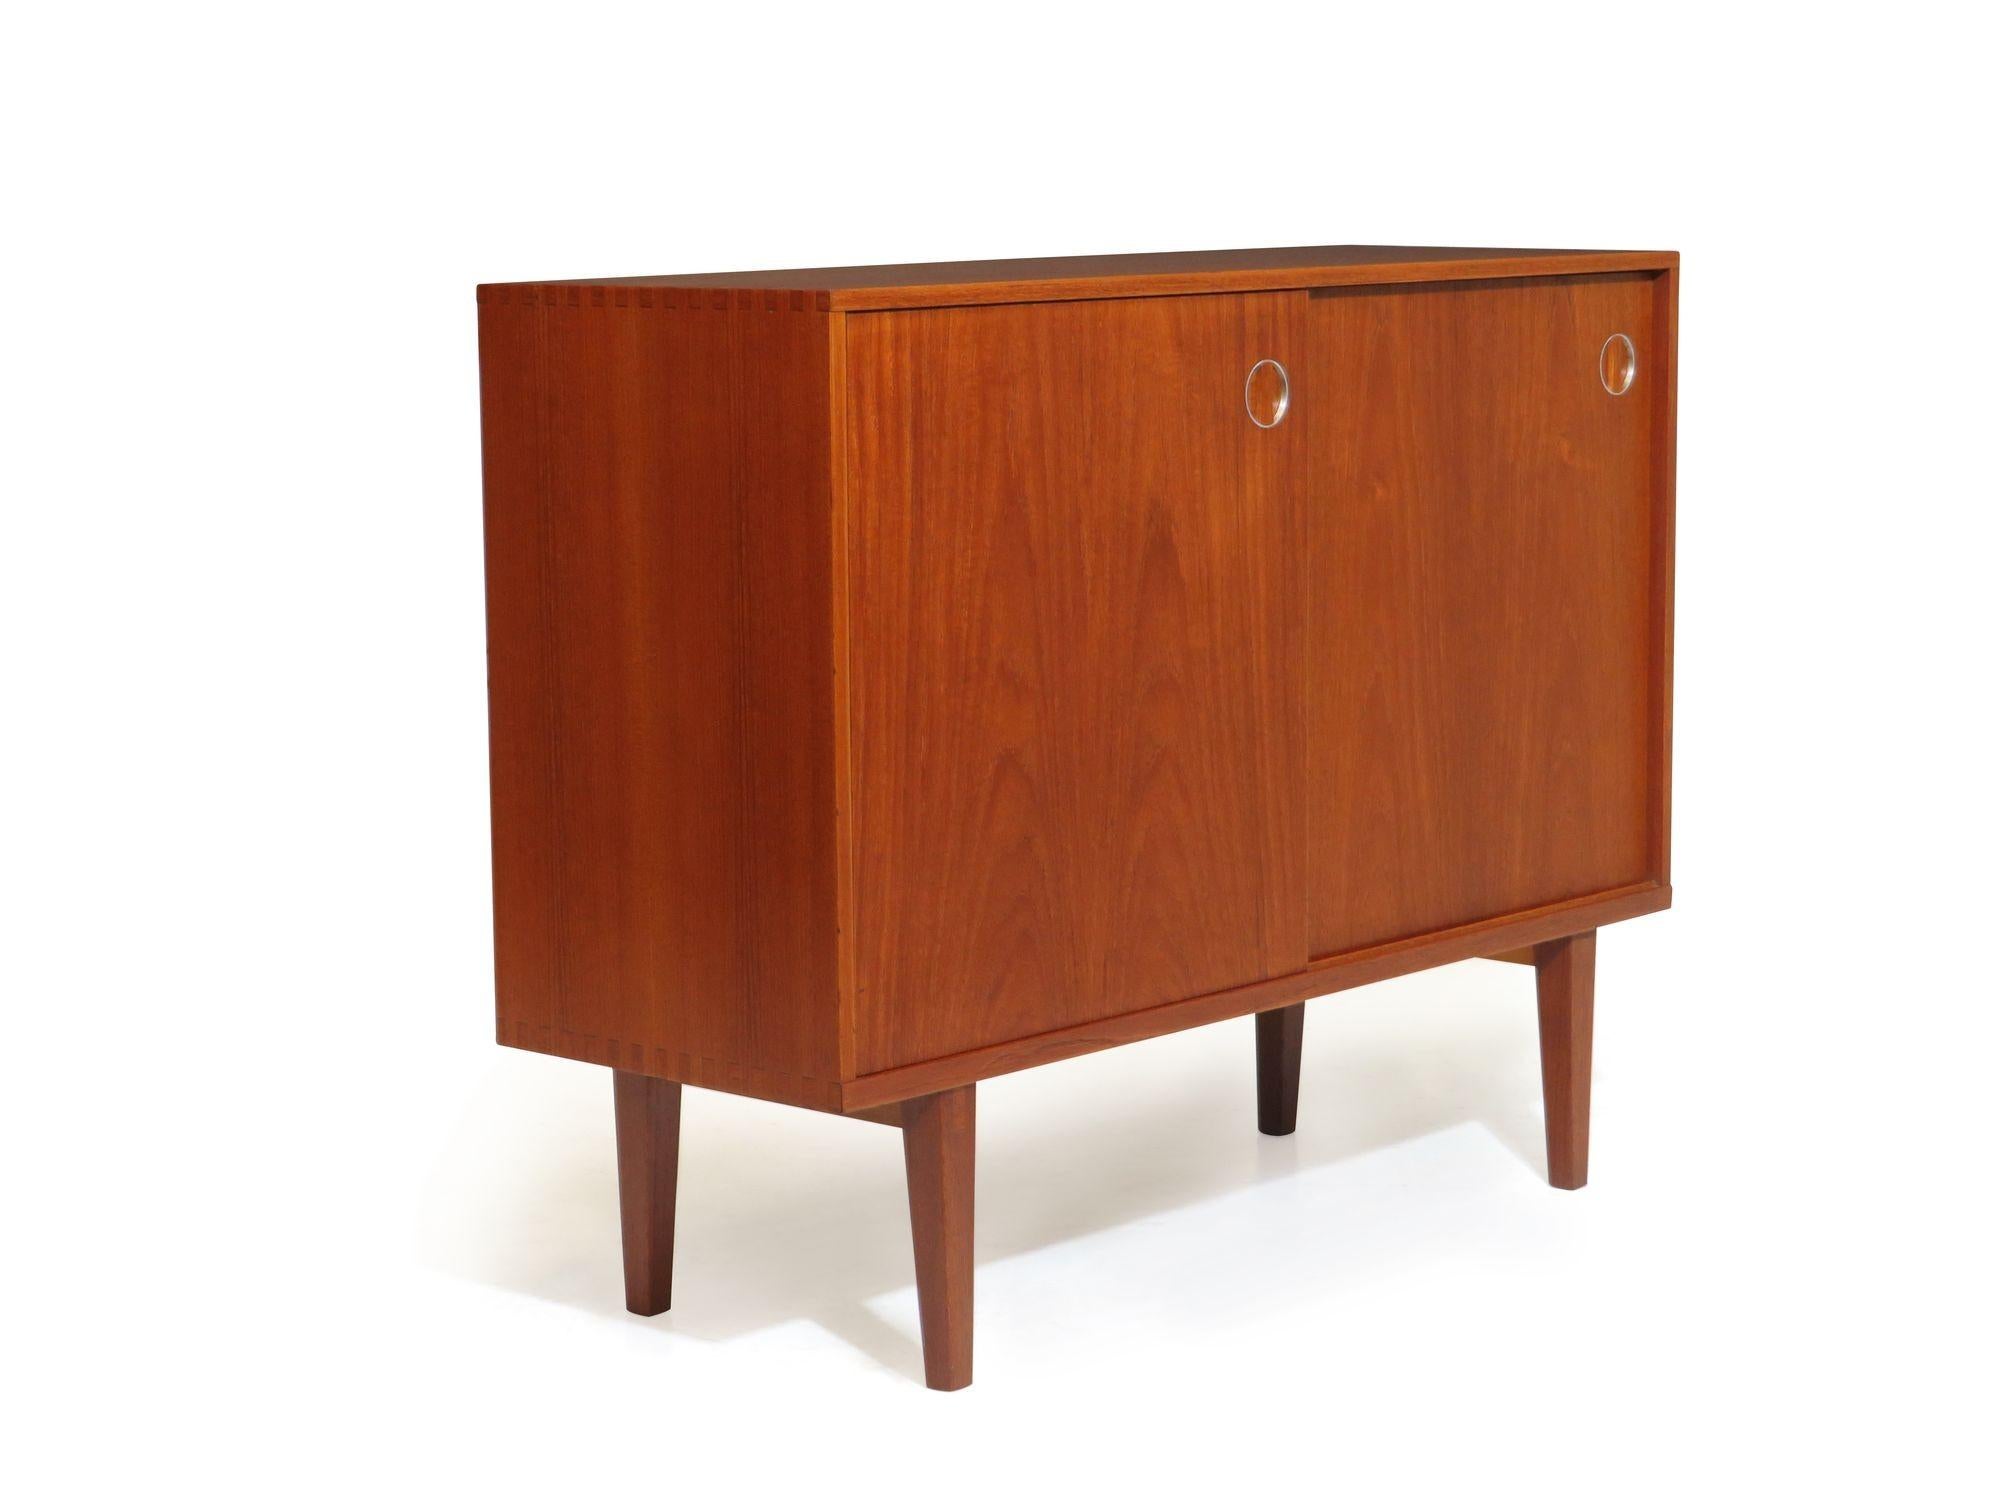 Mid-Century Modern teak cabinet designed and manufactured in Denmark with two sliding doors, interior adjustable shelves, and raised on tapered legs. Modest proportions make for a versatile cabinet appropriate as nightstand, media cabinet, or as